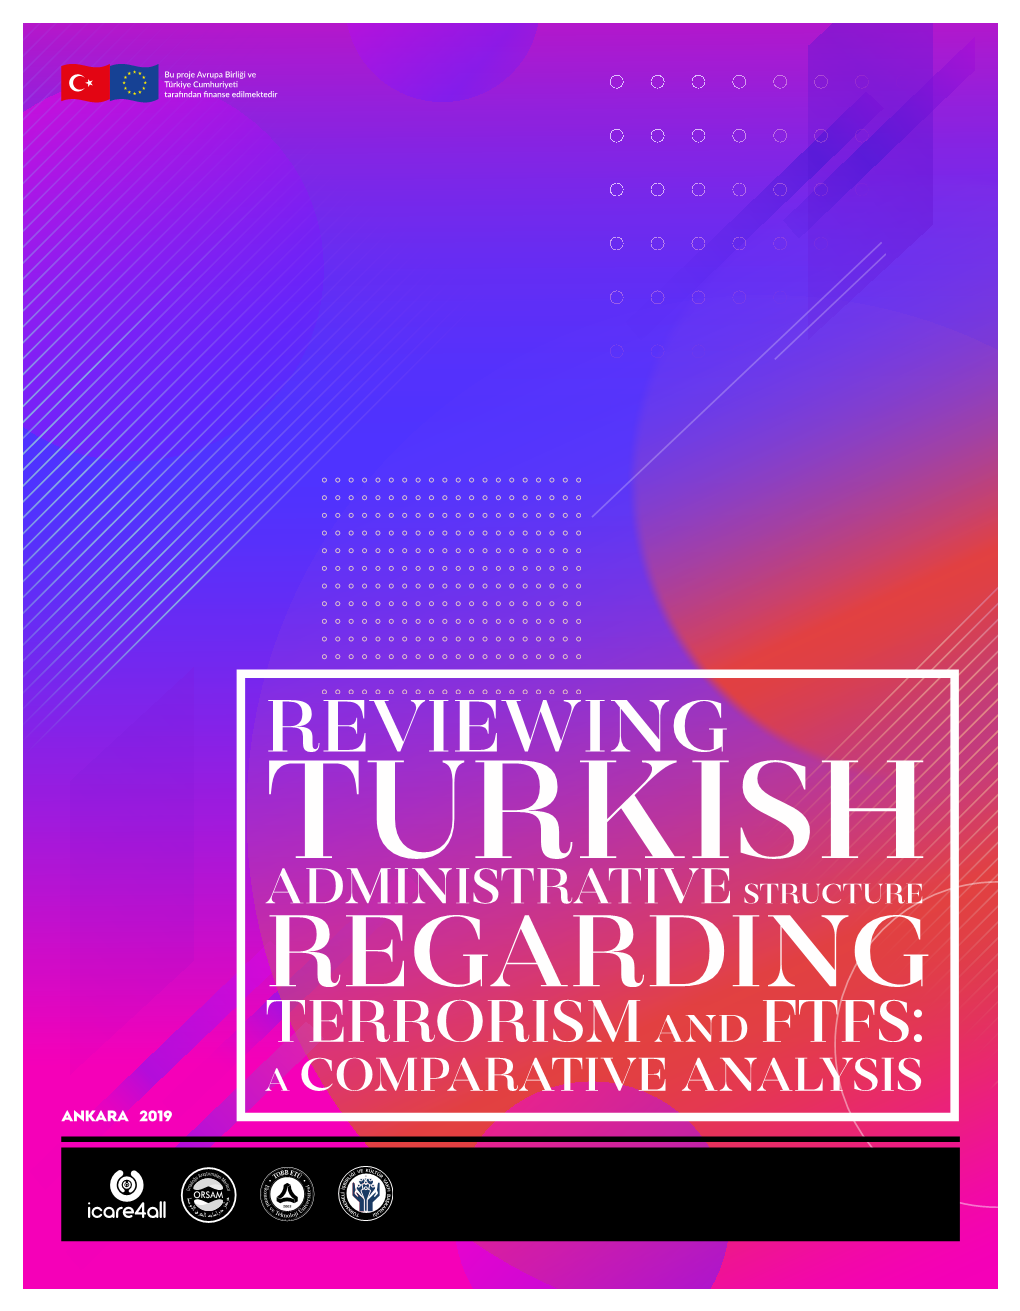 Reviewing Turkish Administrative Structure Regarding Terrorism and Ftfs: a Comparative Analysis Ankara 2019